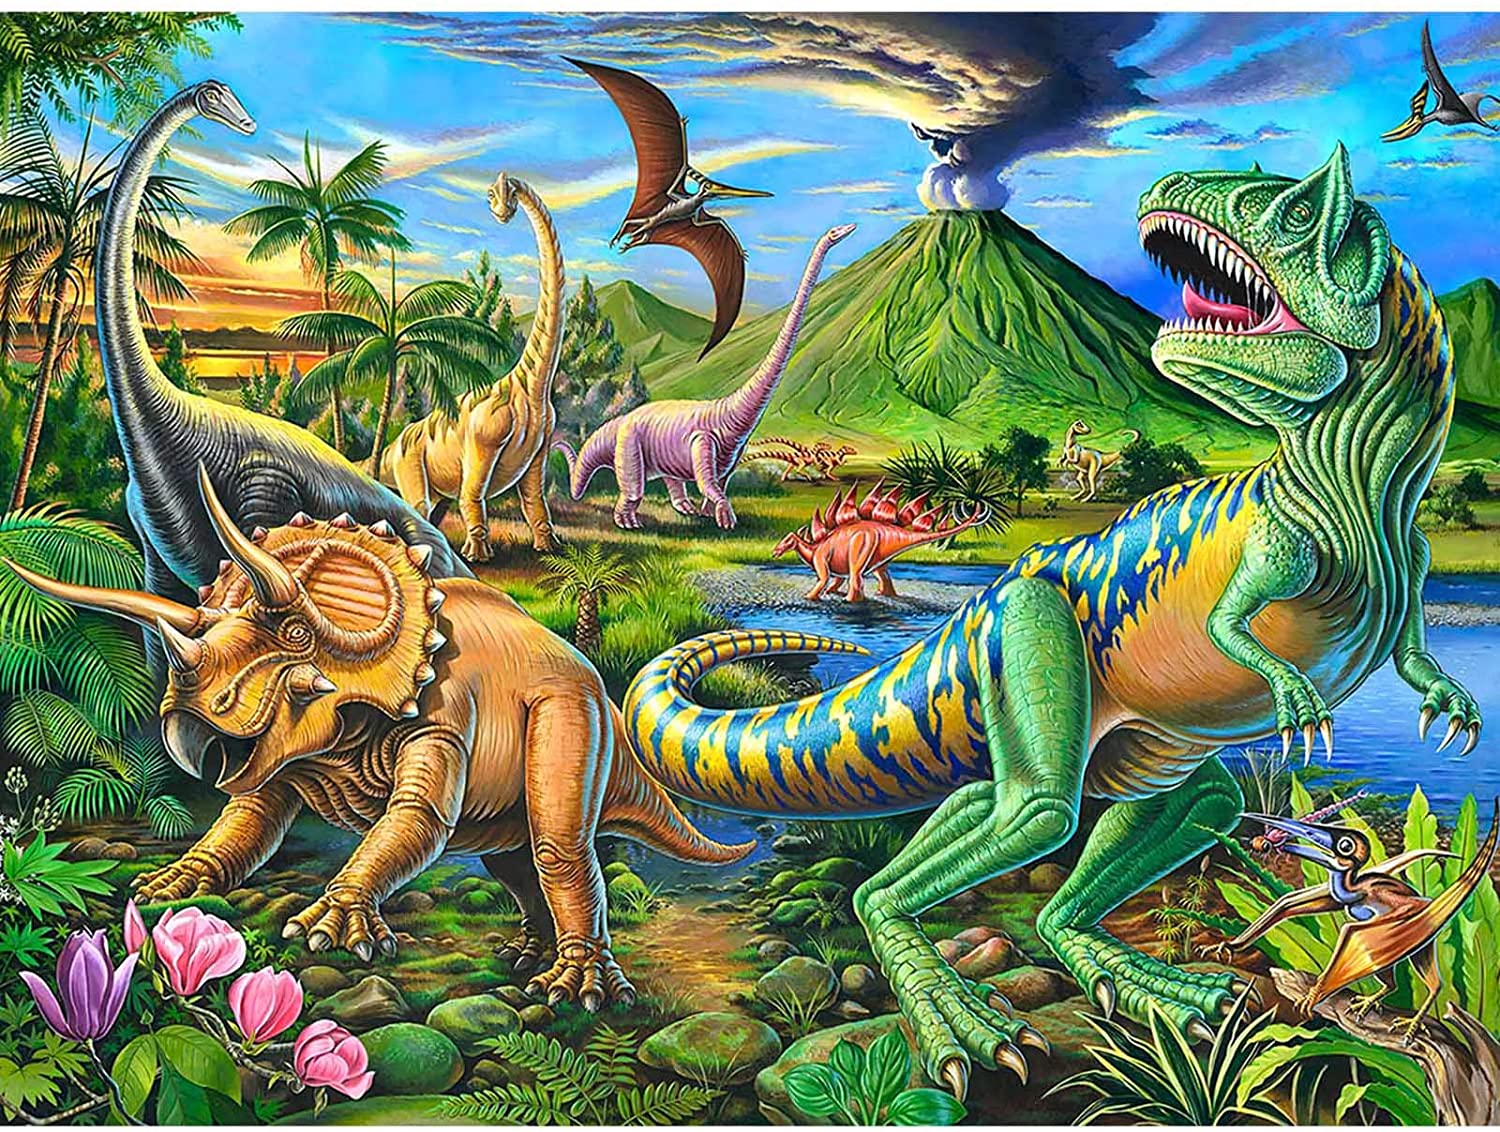 Puzzles for Kids Ages 4-8 Year Old,100 Piece Dinosaur Jigsaw Puzzle for Toddler Children Learning Educational Puzzles Toys for Boys and Girls 